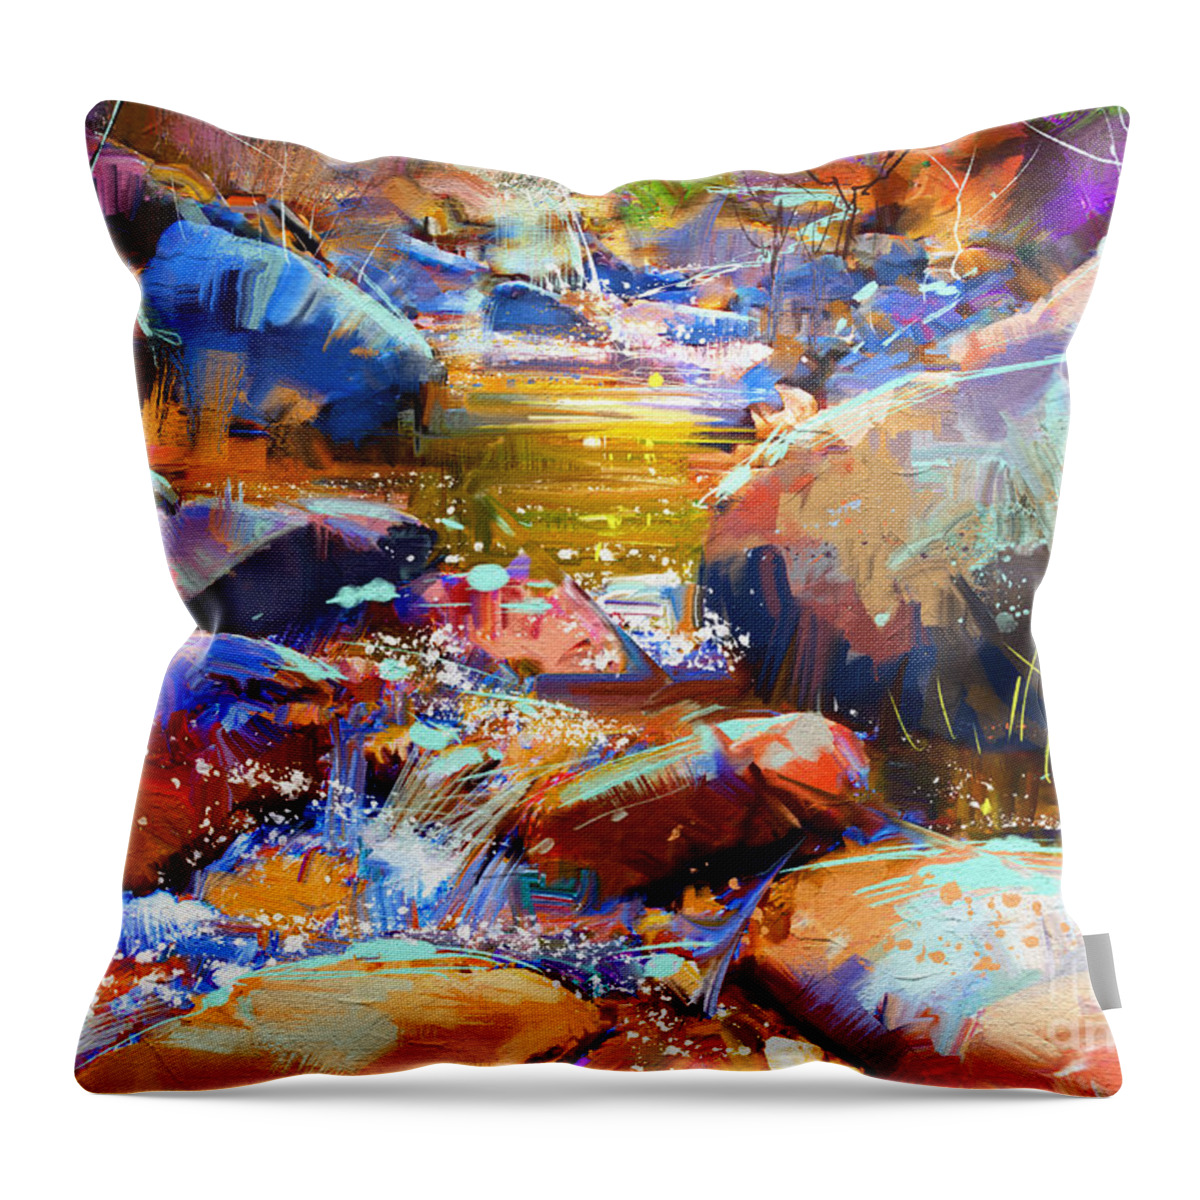 Art Throw Pillow featuring the painting Colorful Stones by Tithi Luadthong